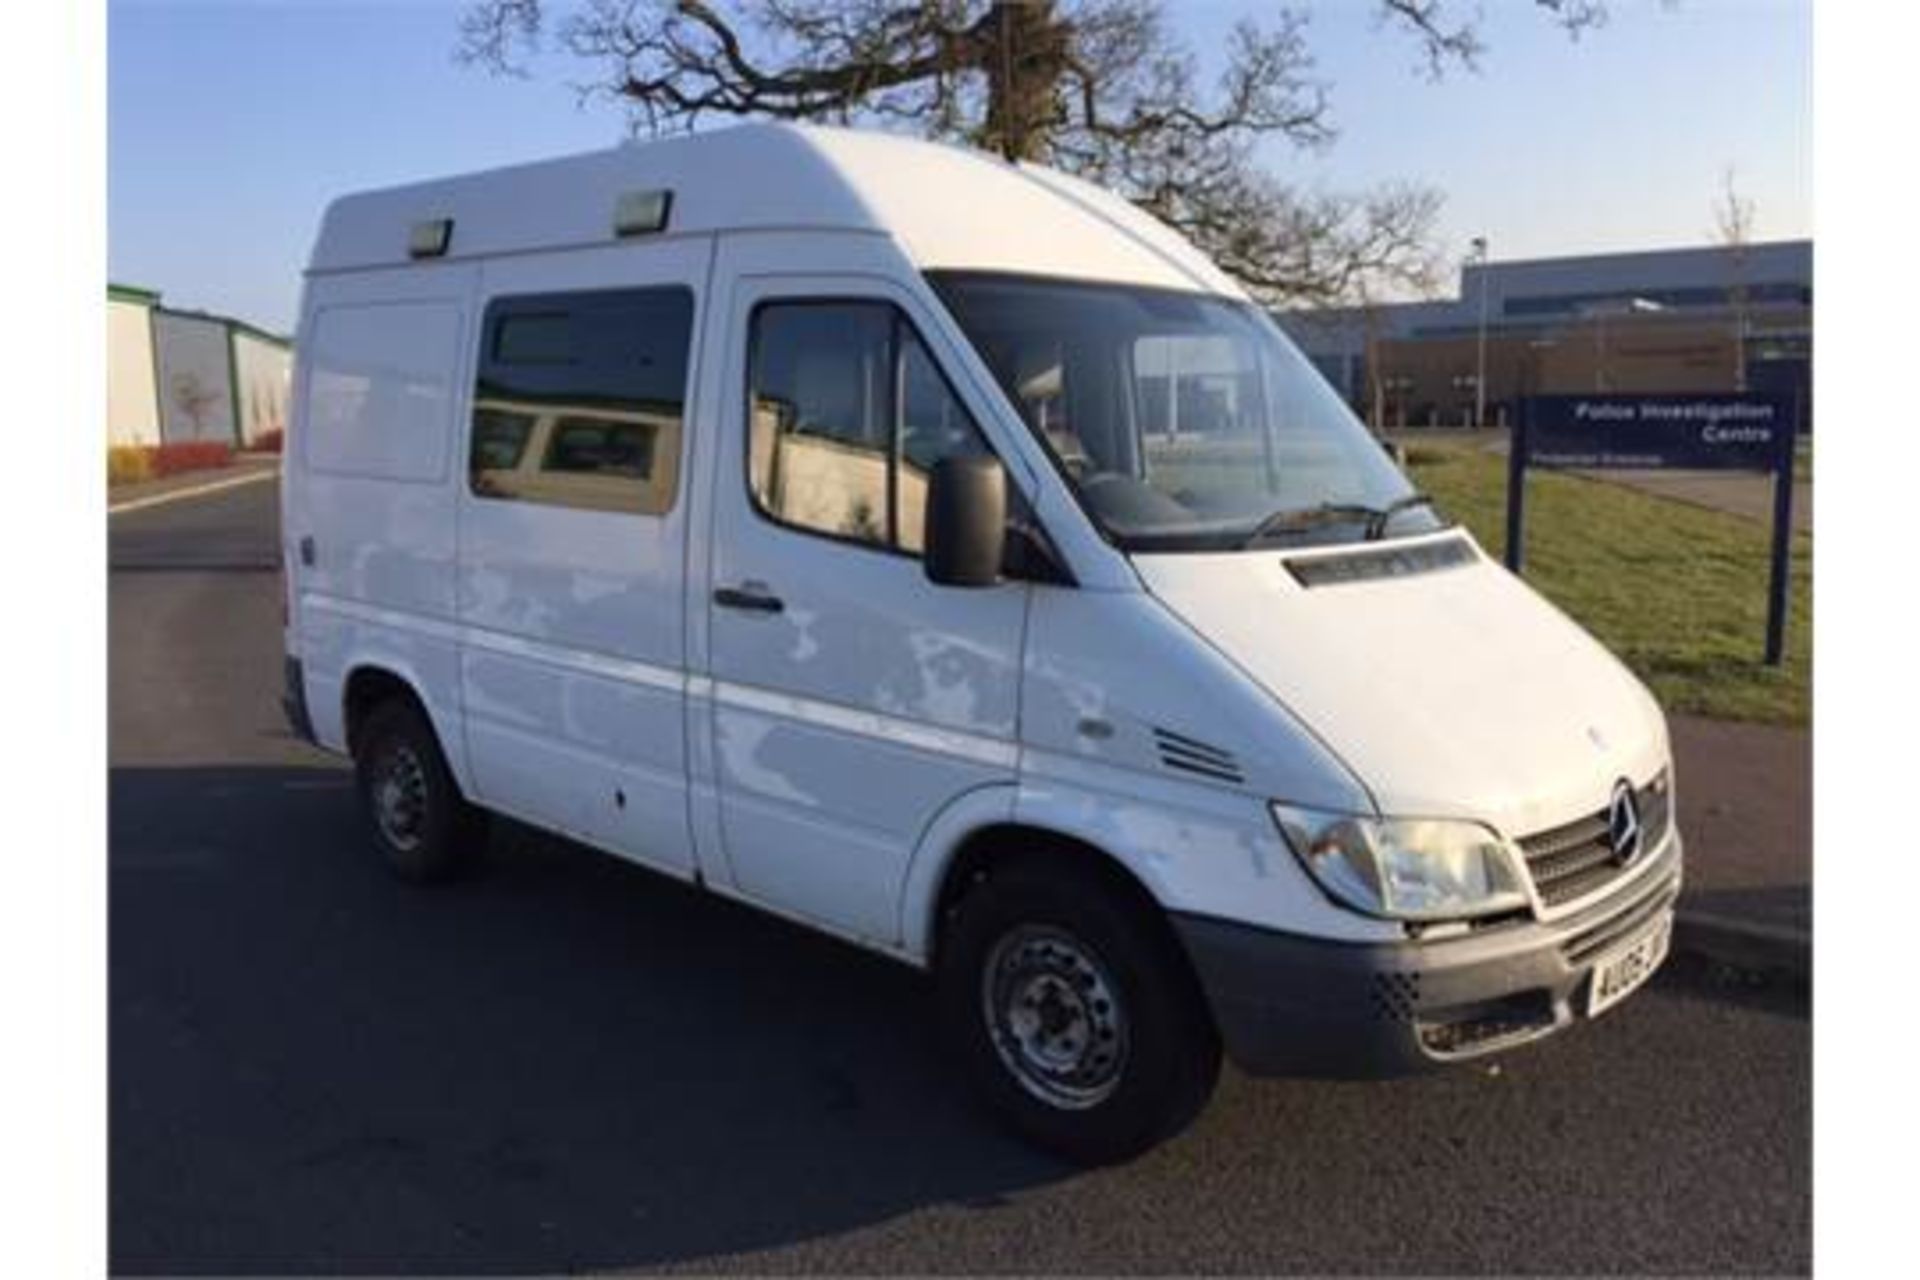 2005 Mercedes Sprinter 311 cdi 2148cc Diesel Van with side windows Owned and used by the police from